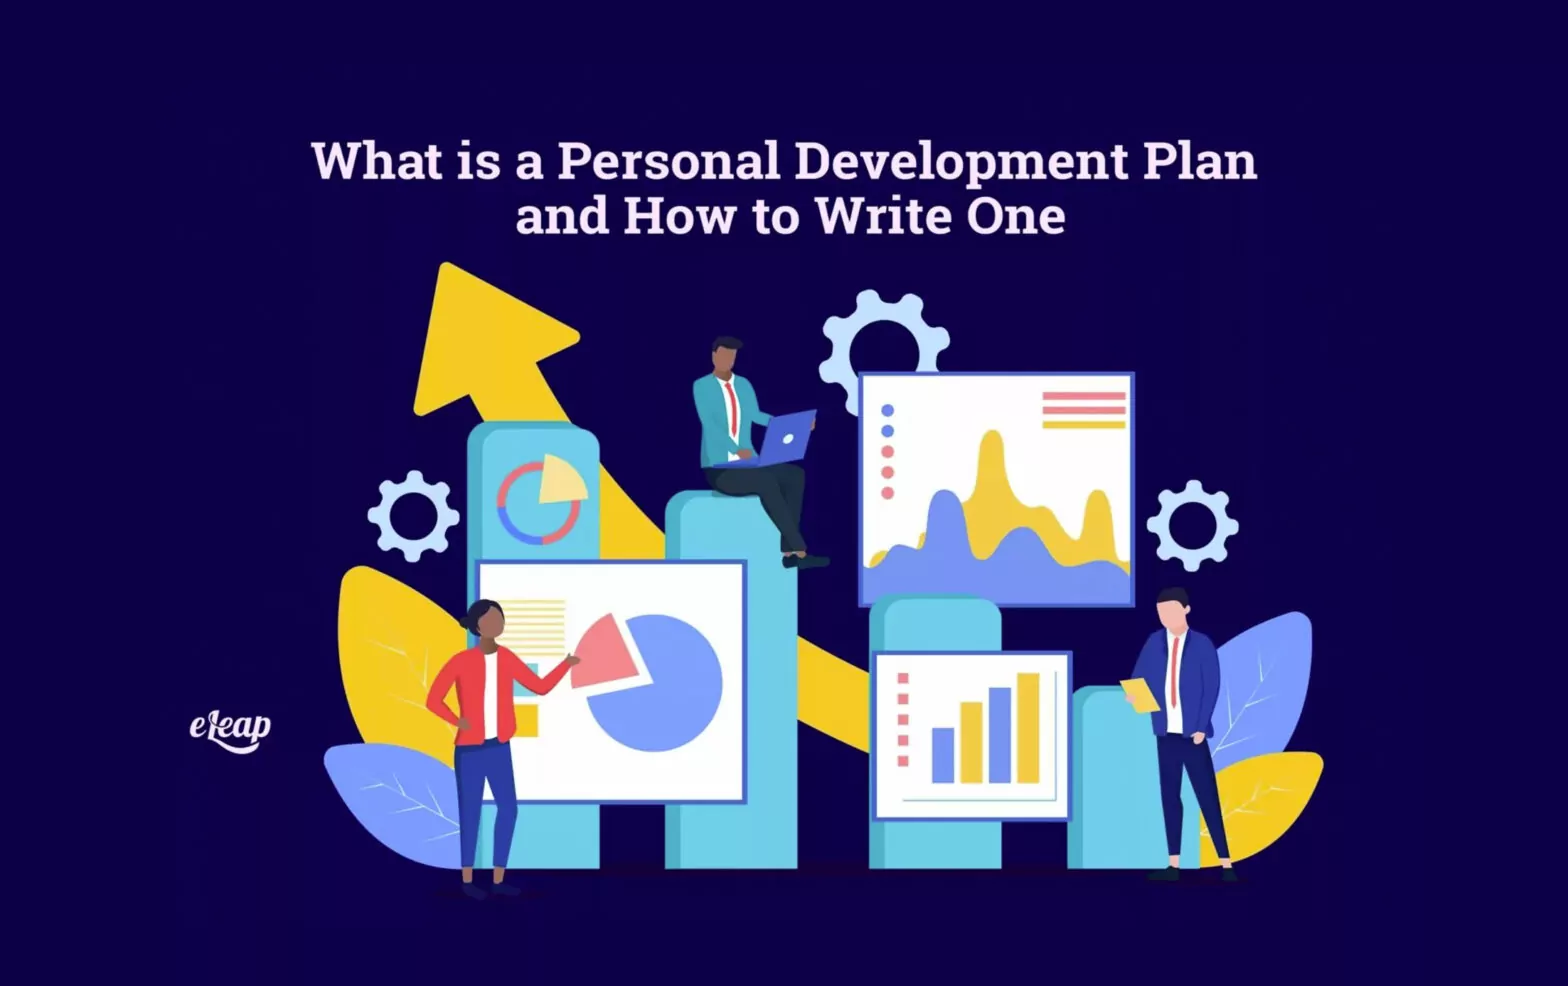 What is a Personal Development Plan and How to Write One